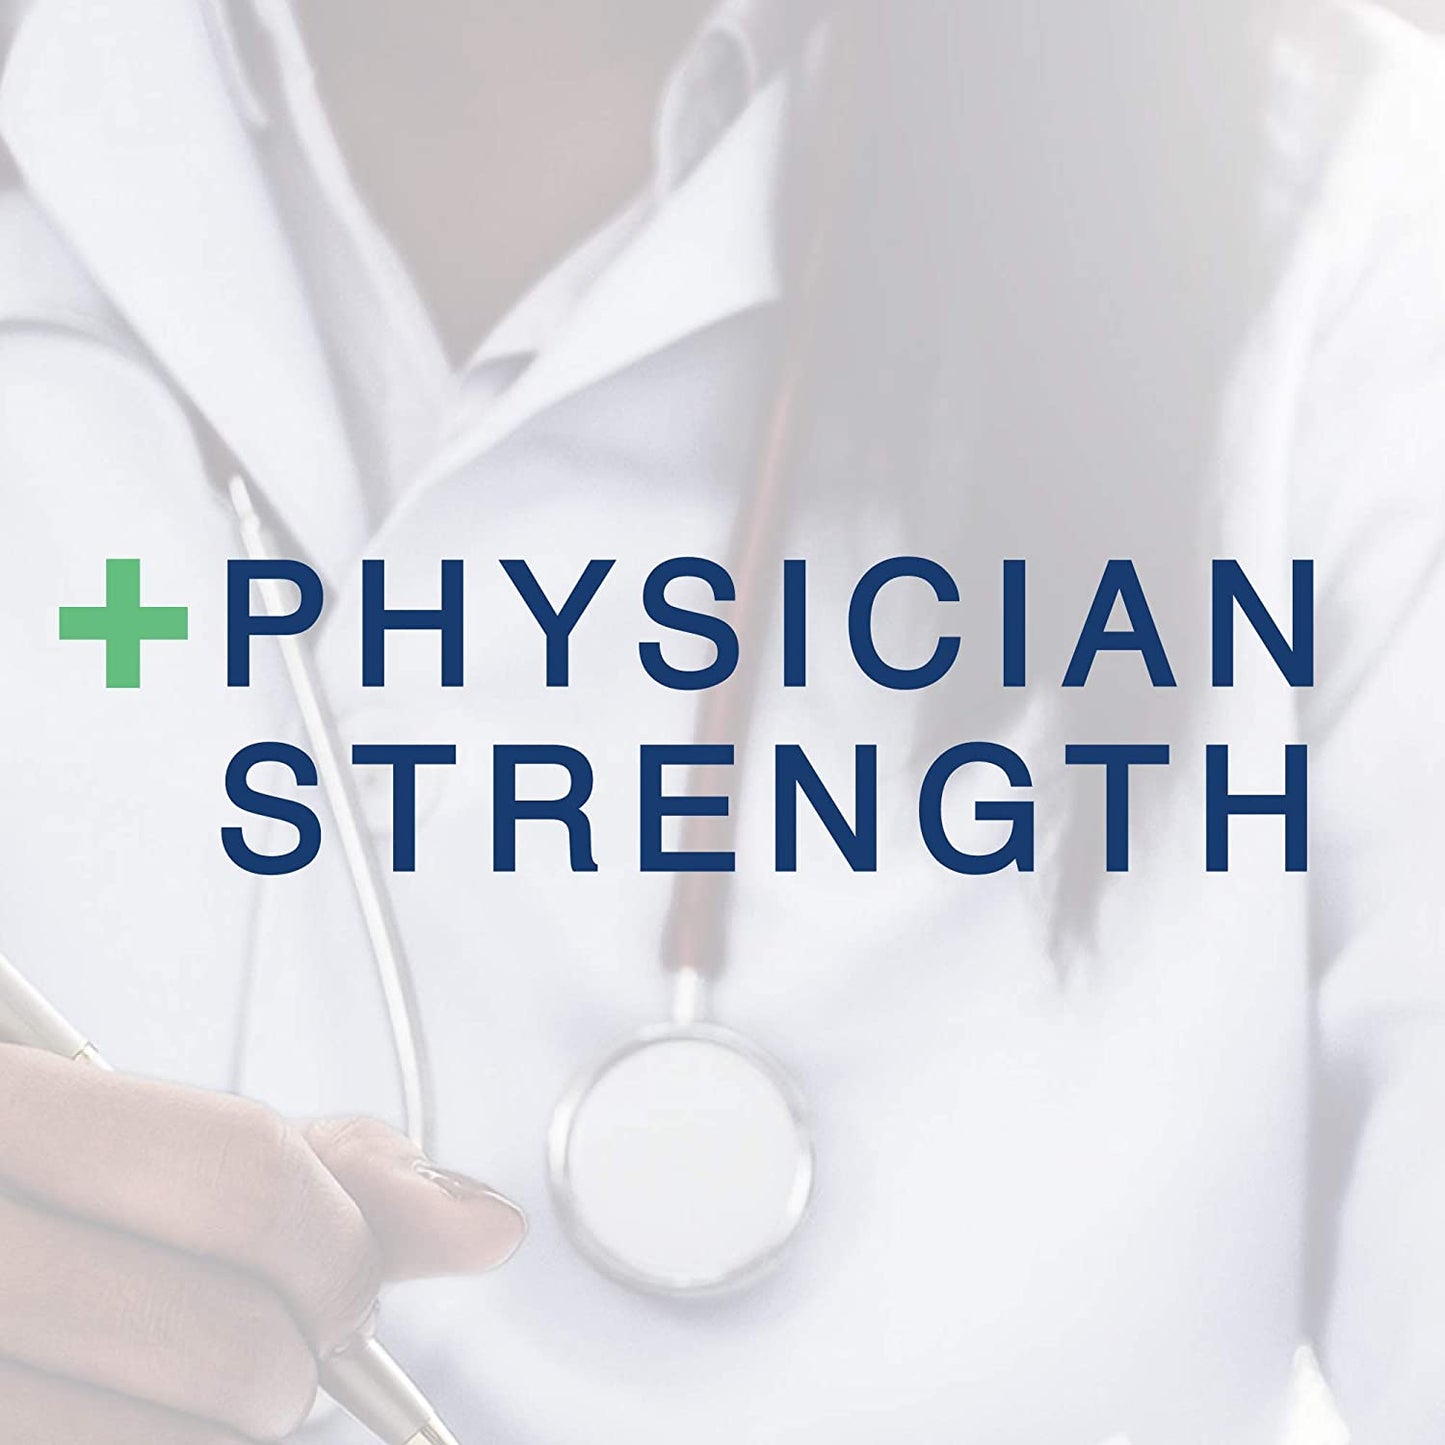 physician strength with doctor wearing stethoscope in background